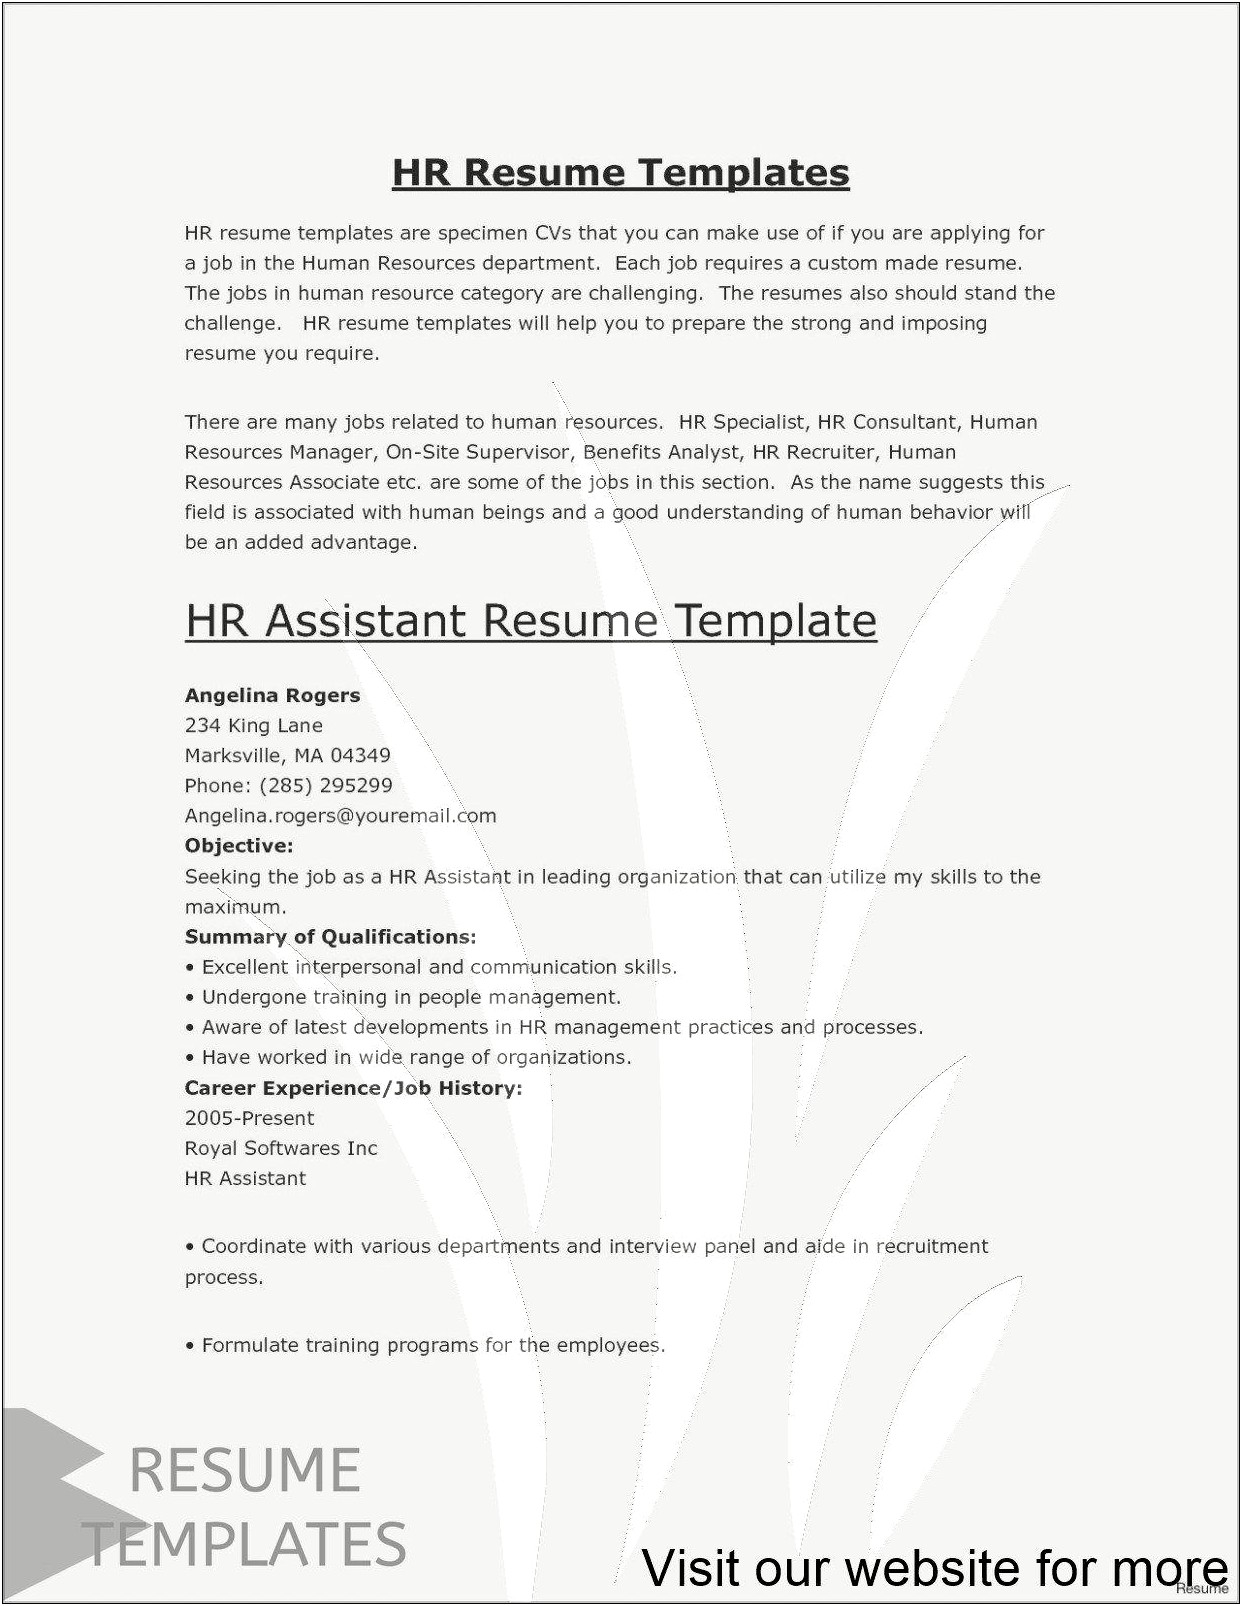 Make A Simple Resume For Free